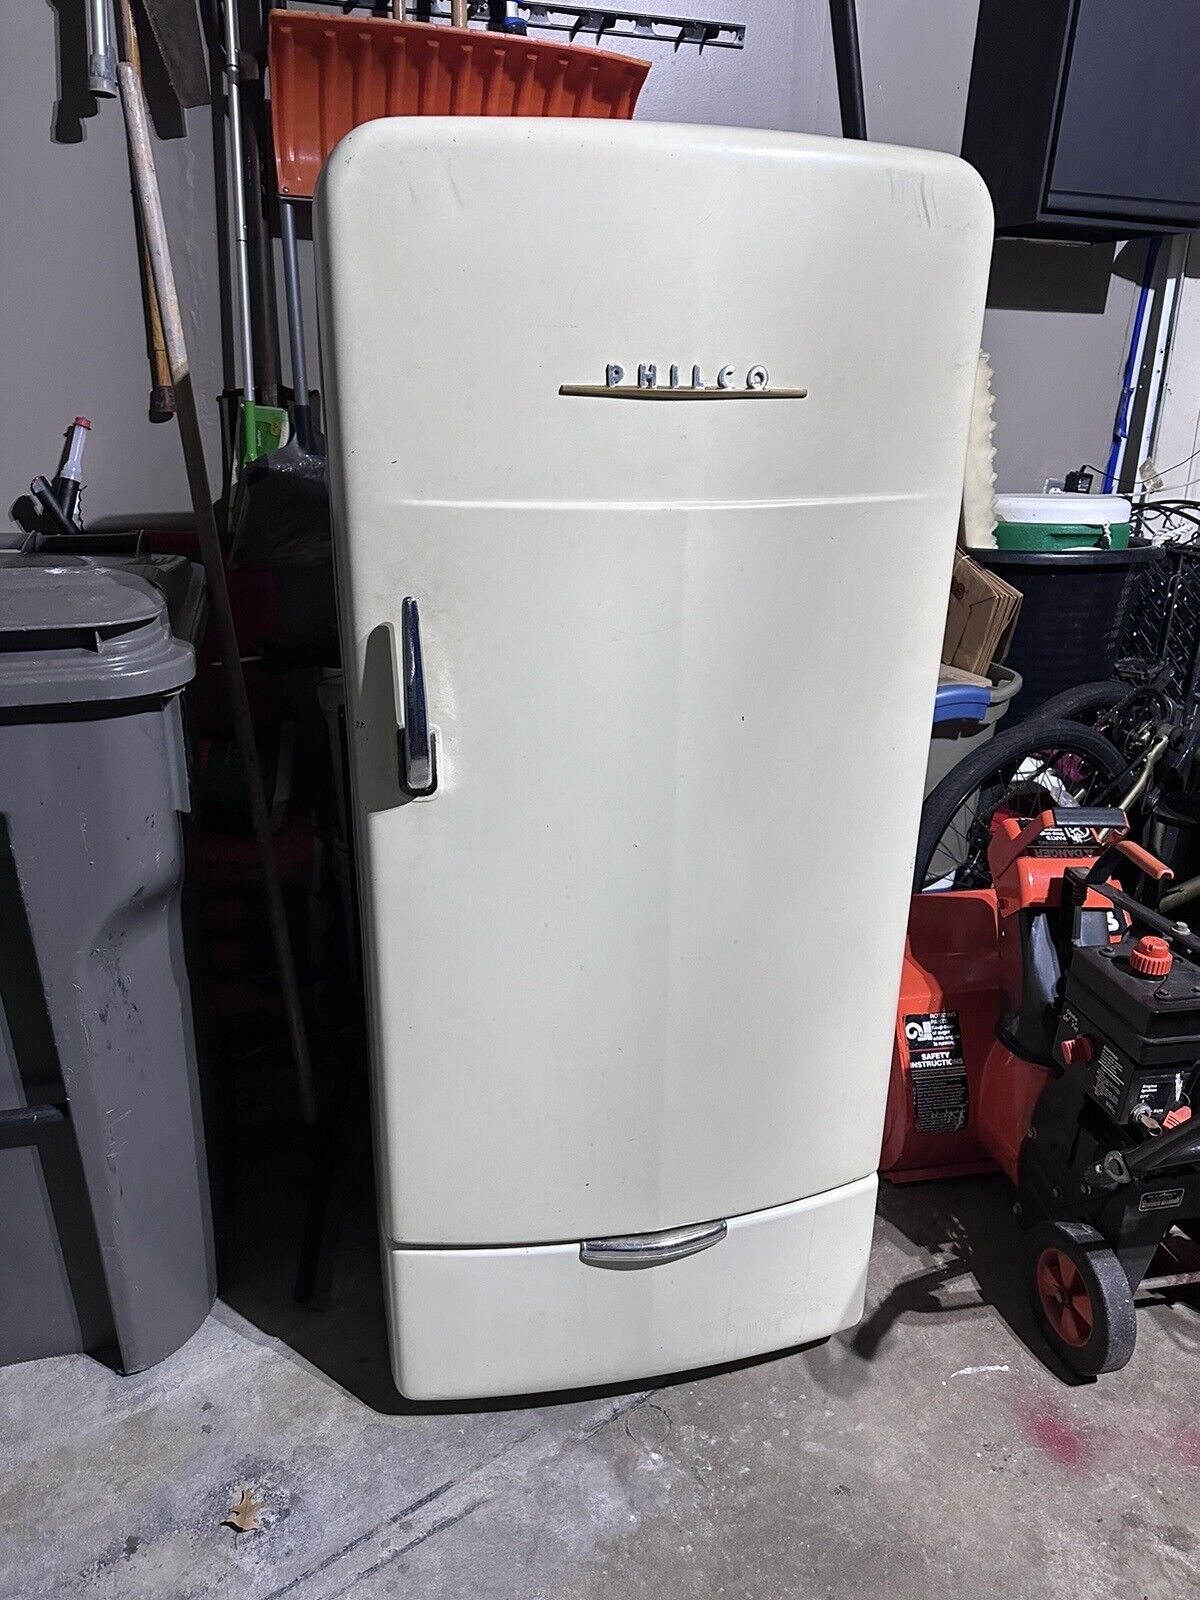 Vintage 1950’s Philco Refrigerator. Great For Restoring Or Parts.